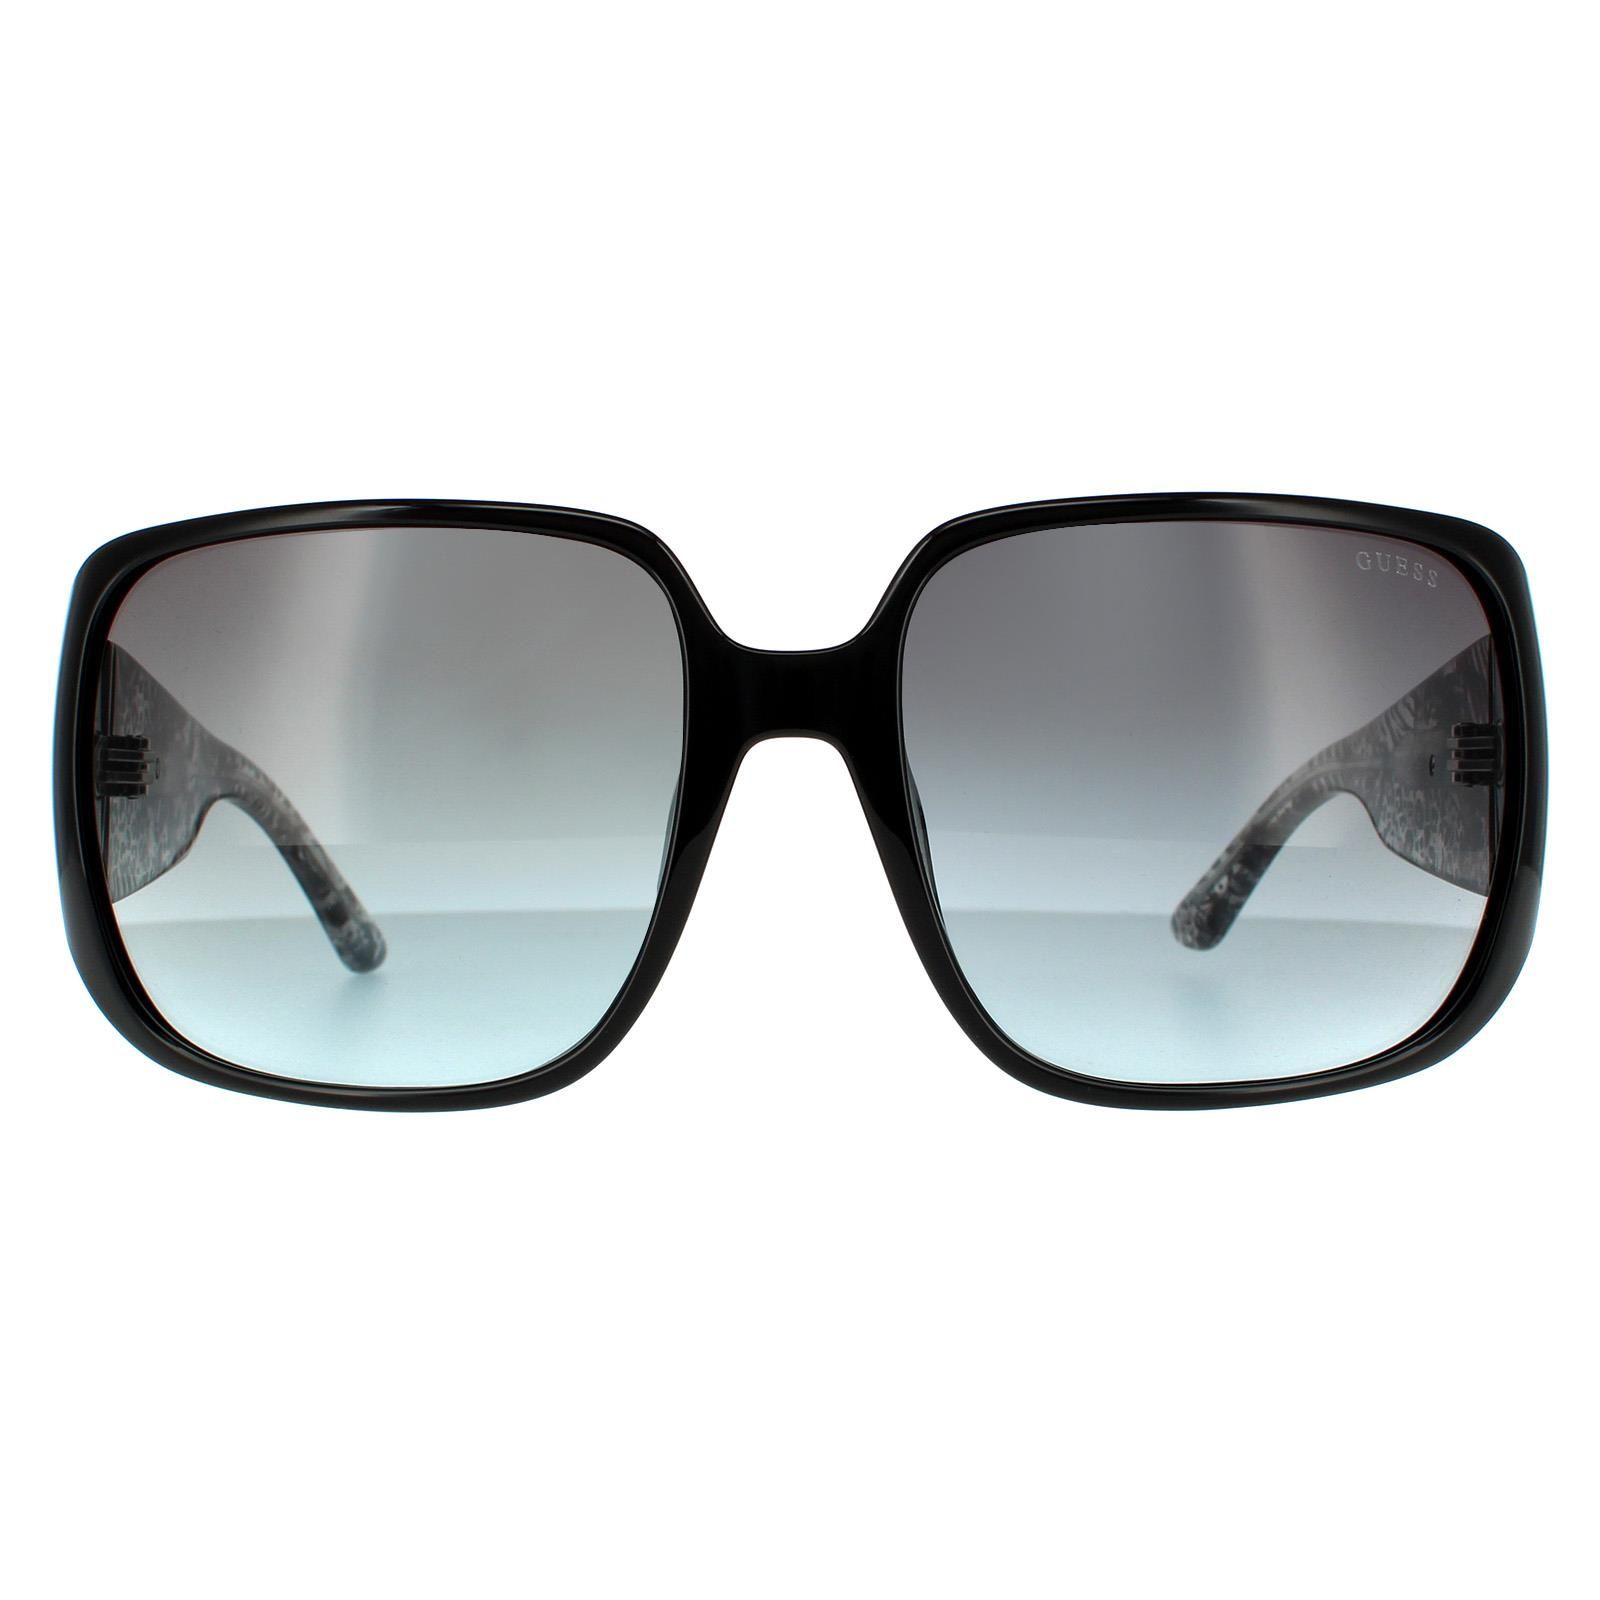 Guess Butterfly Womens Shiny Black Smoke Grey Gradient Sunglasses GU7682 are a lovely oversized style with uniquely patterned temples for a strong fashionable look.